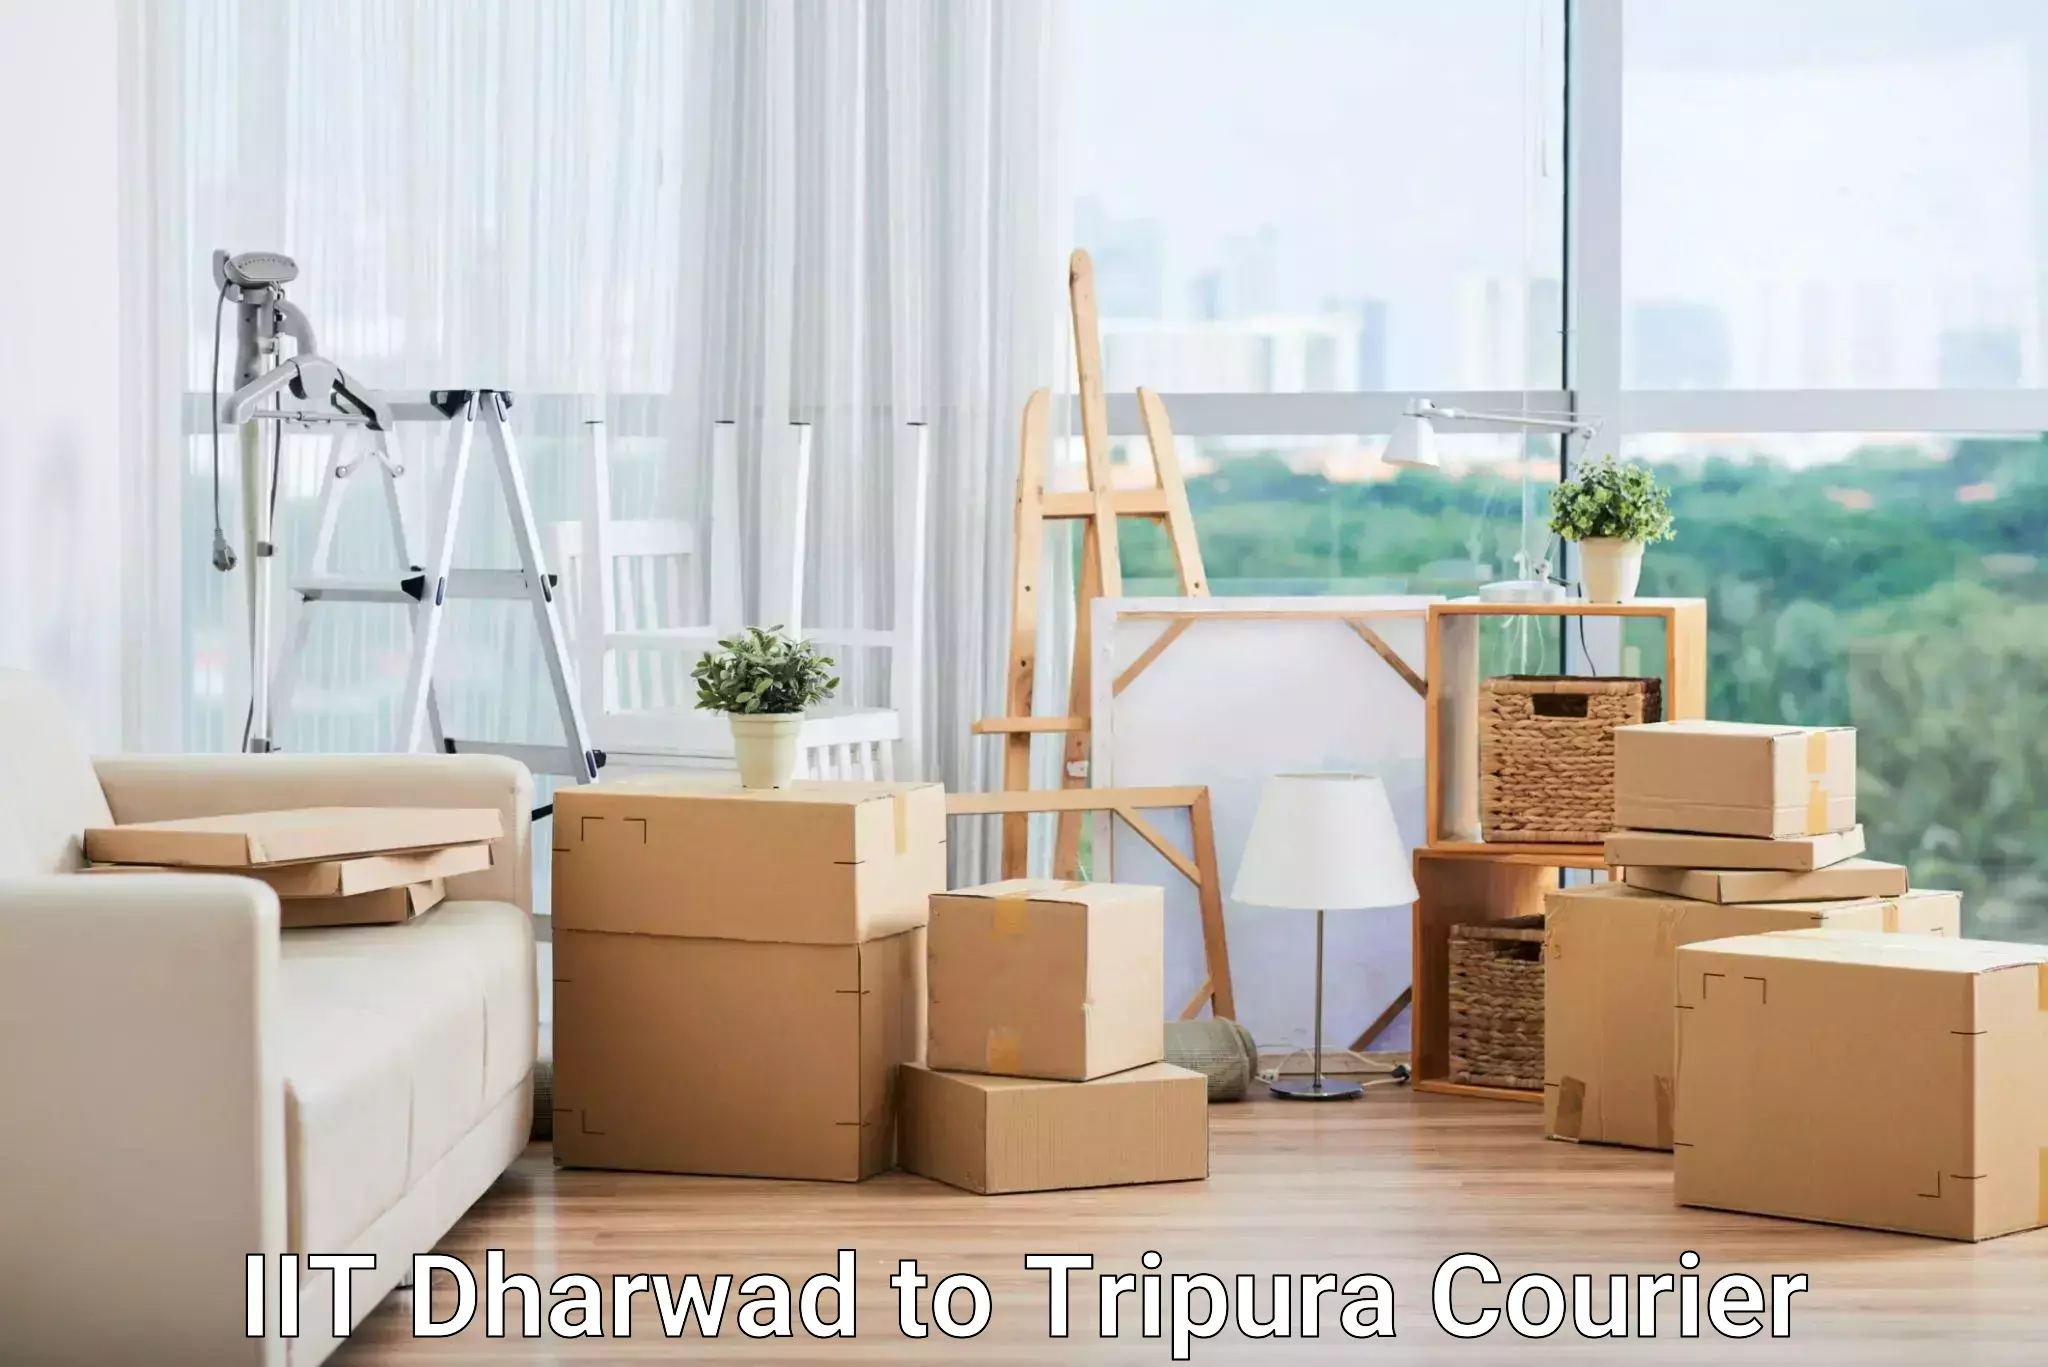 On-call courier service IIT Dharwad to Tripura